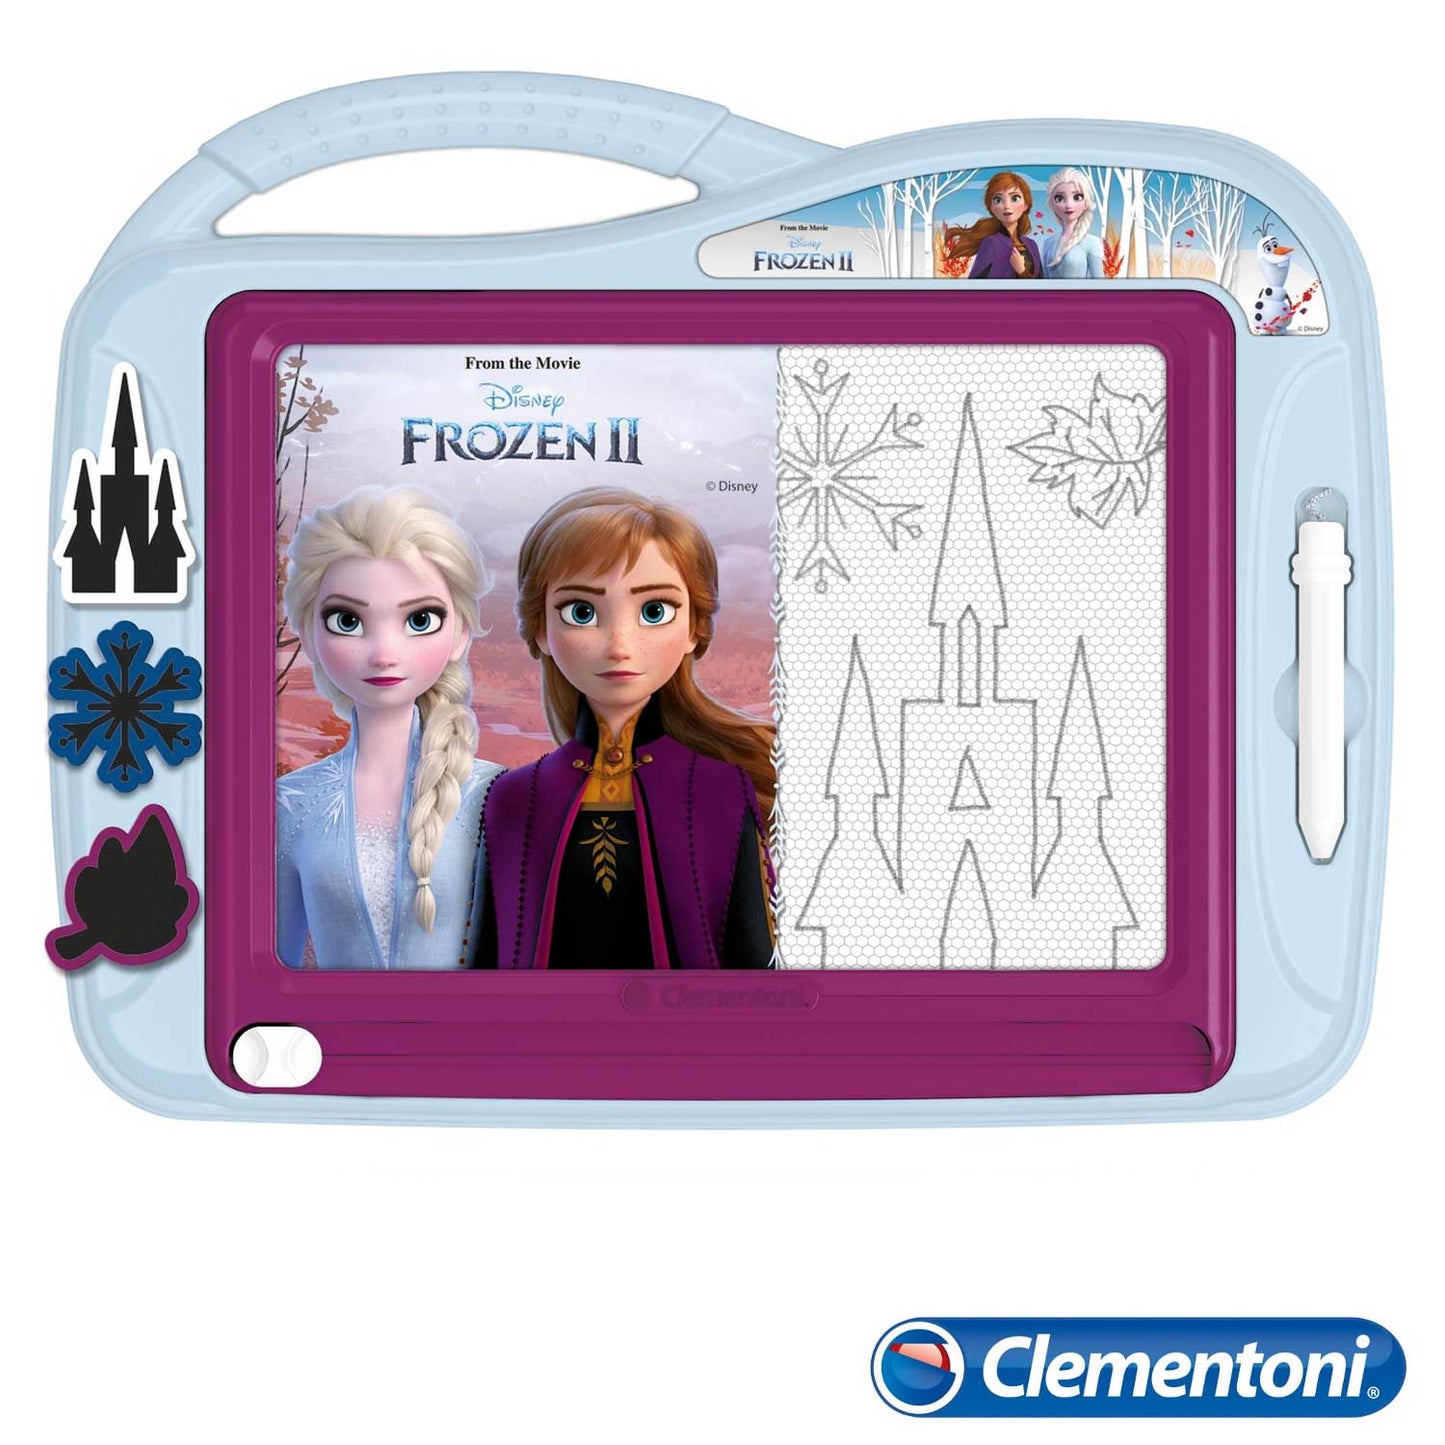 Clementoni - Magnetic Whiteboard Pen and Shapes